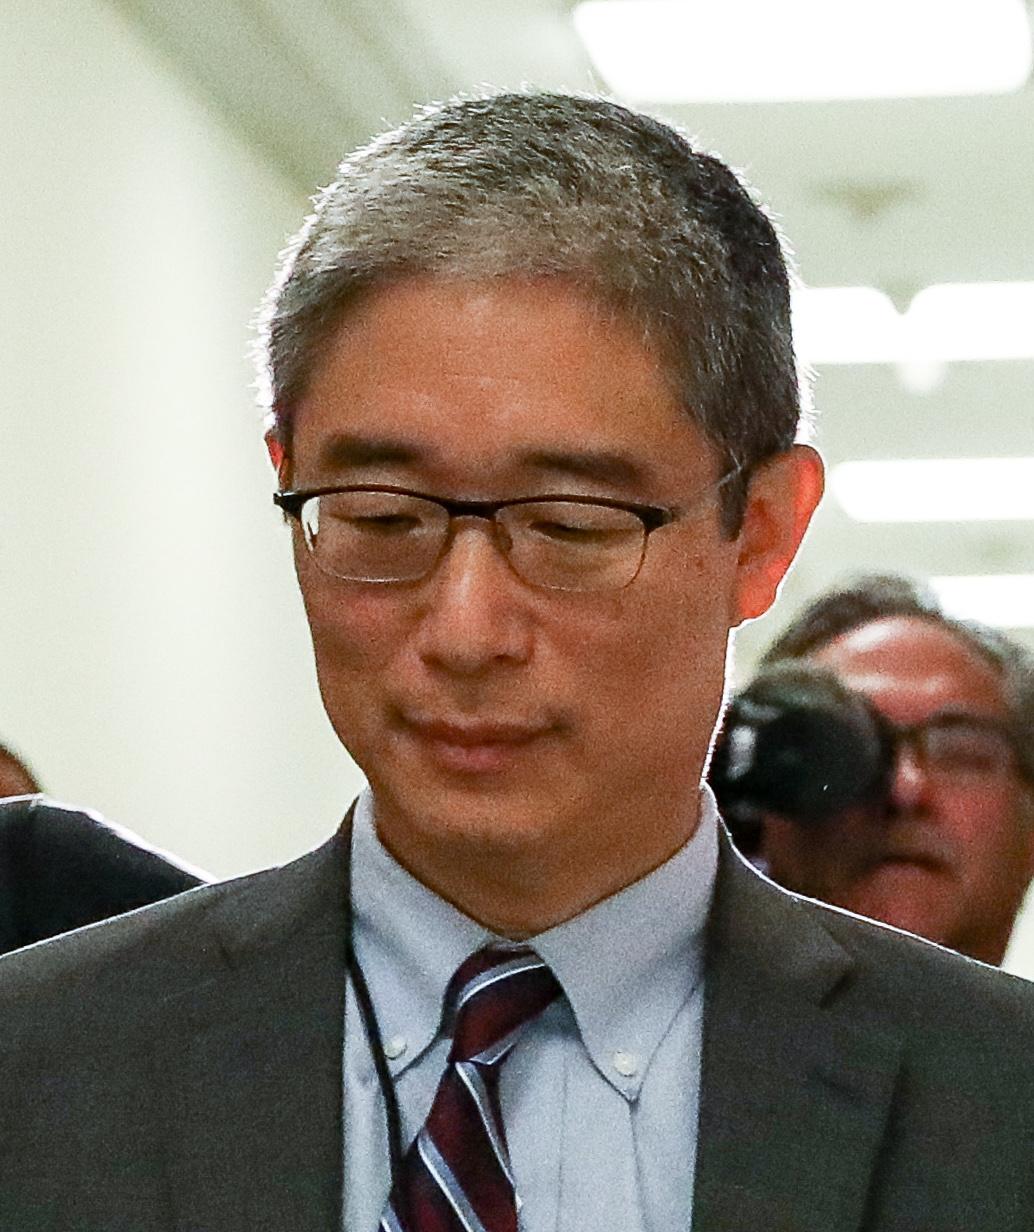 Department of Justice official Bruce Ohr. (Samira Bouaou/The Epoch Times)